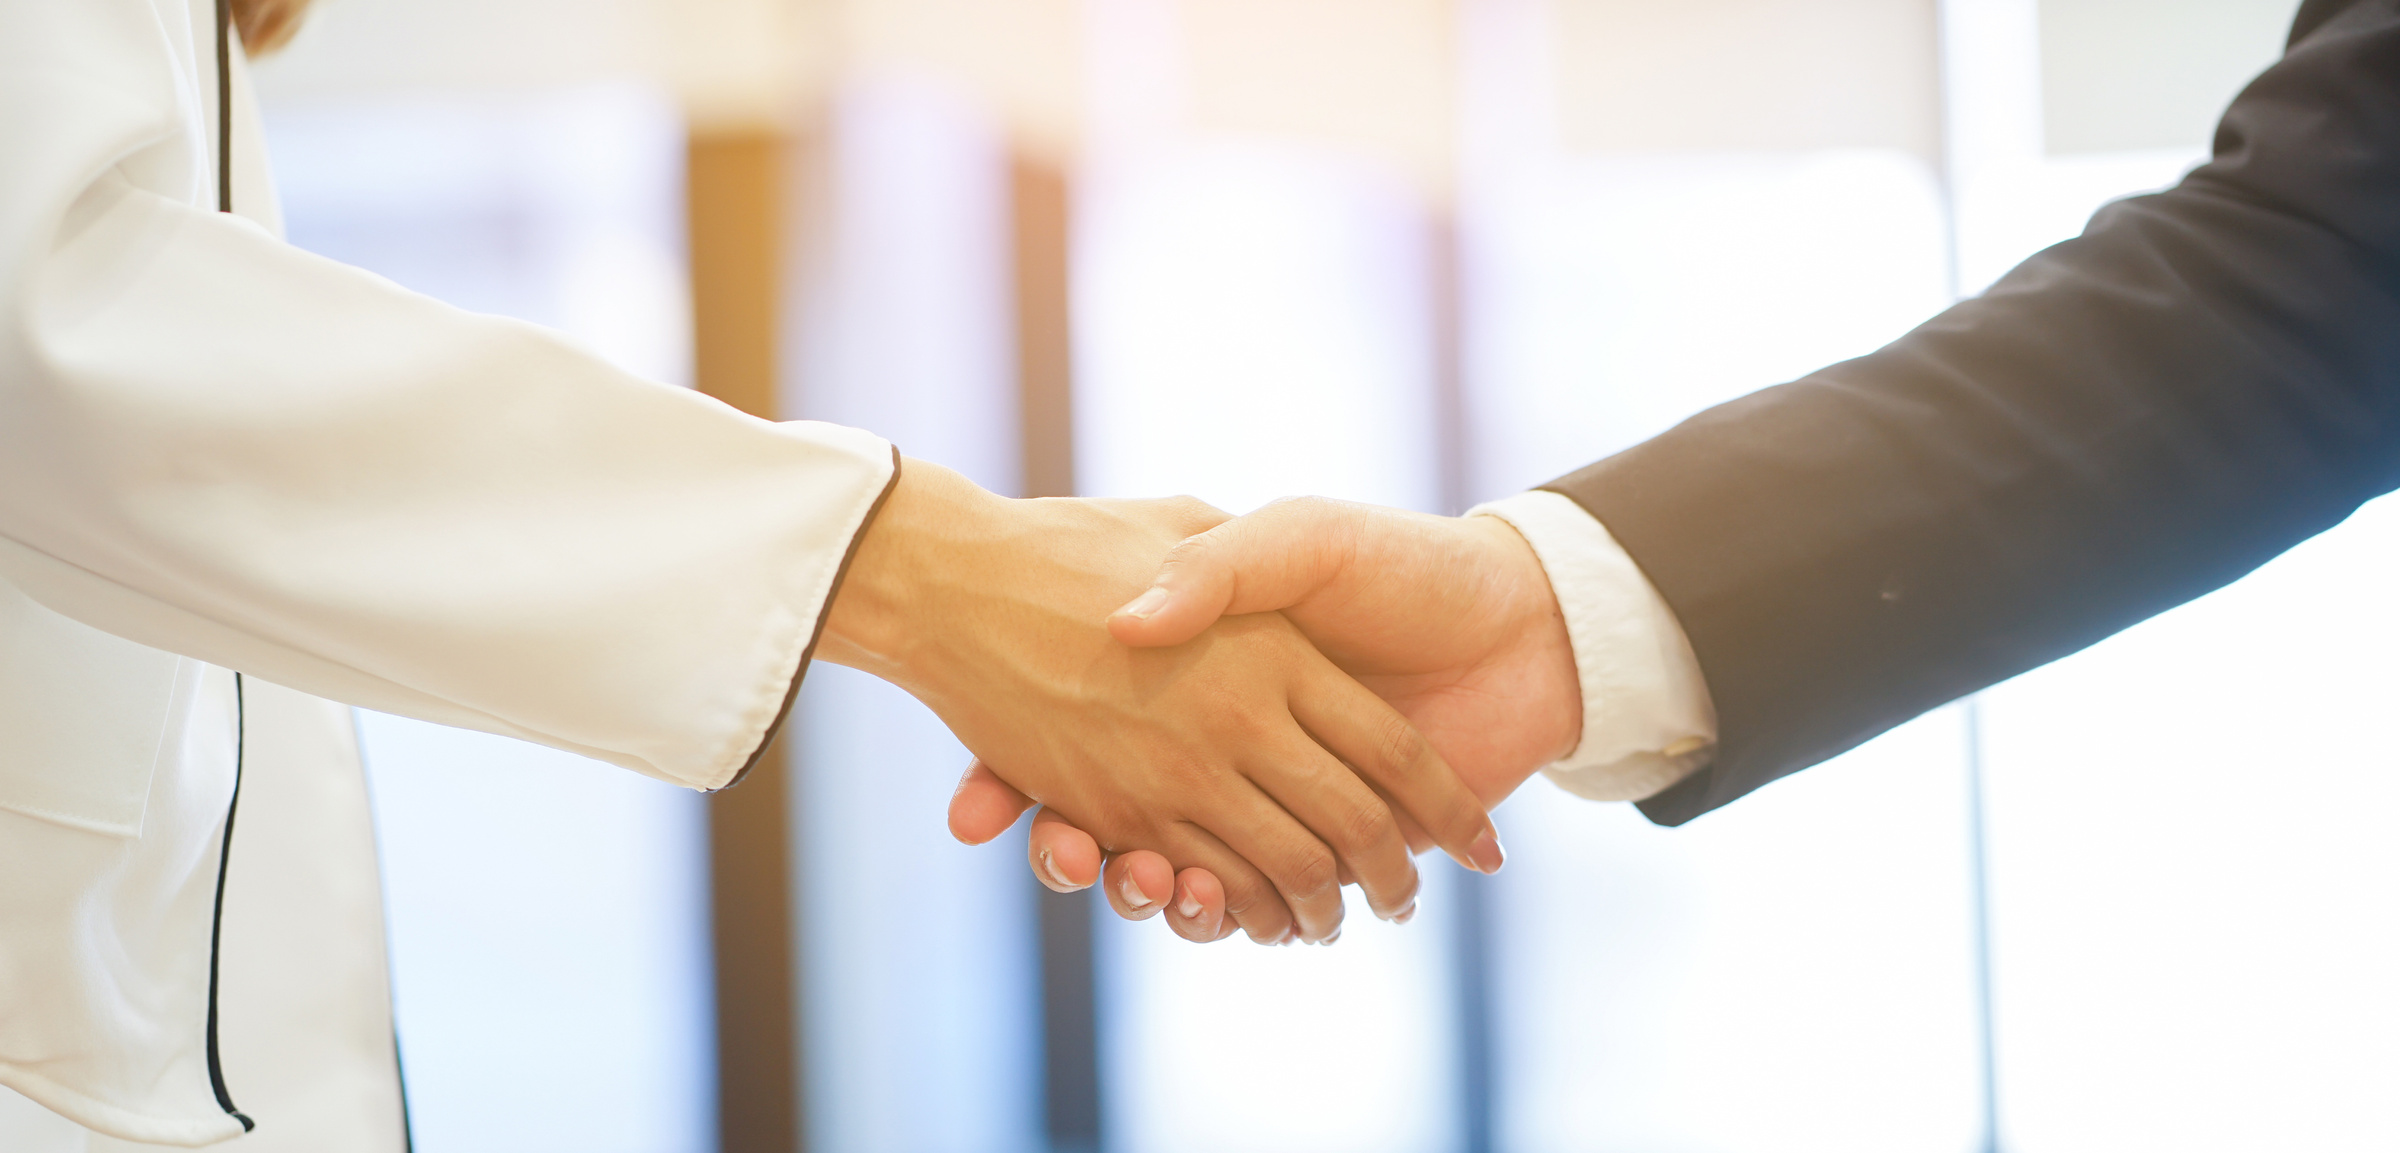 close up  politeness of businesswoman handshake with businessman partner vendor,collaboration of ceo leader hand shake for agreement or deal financial cooperative concept.